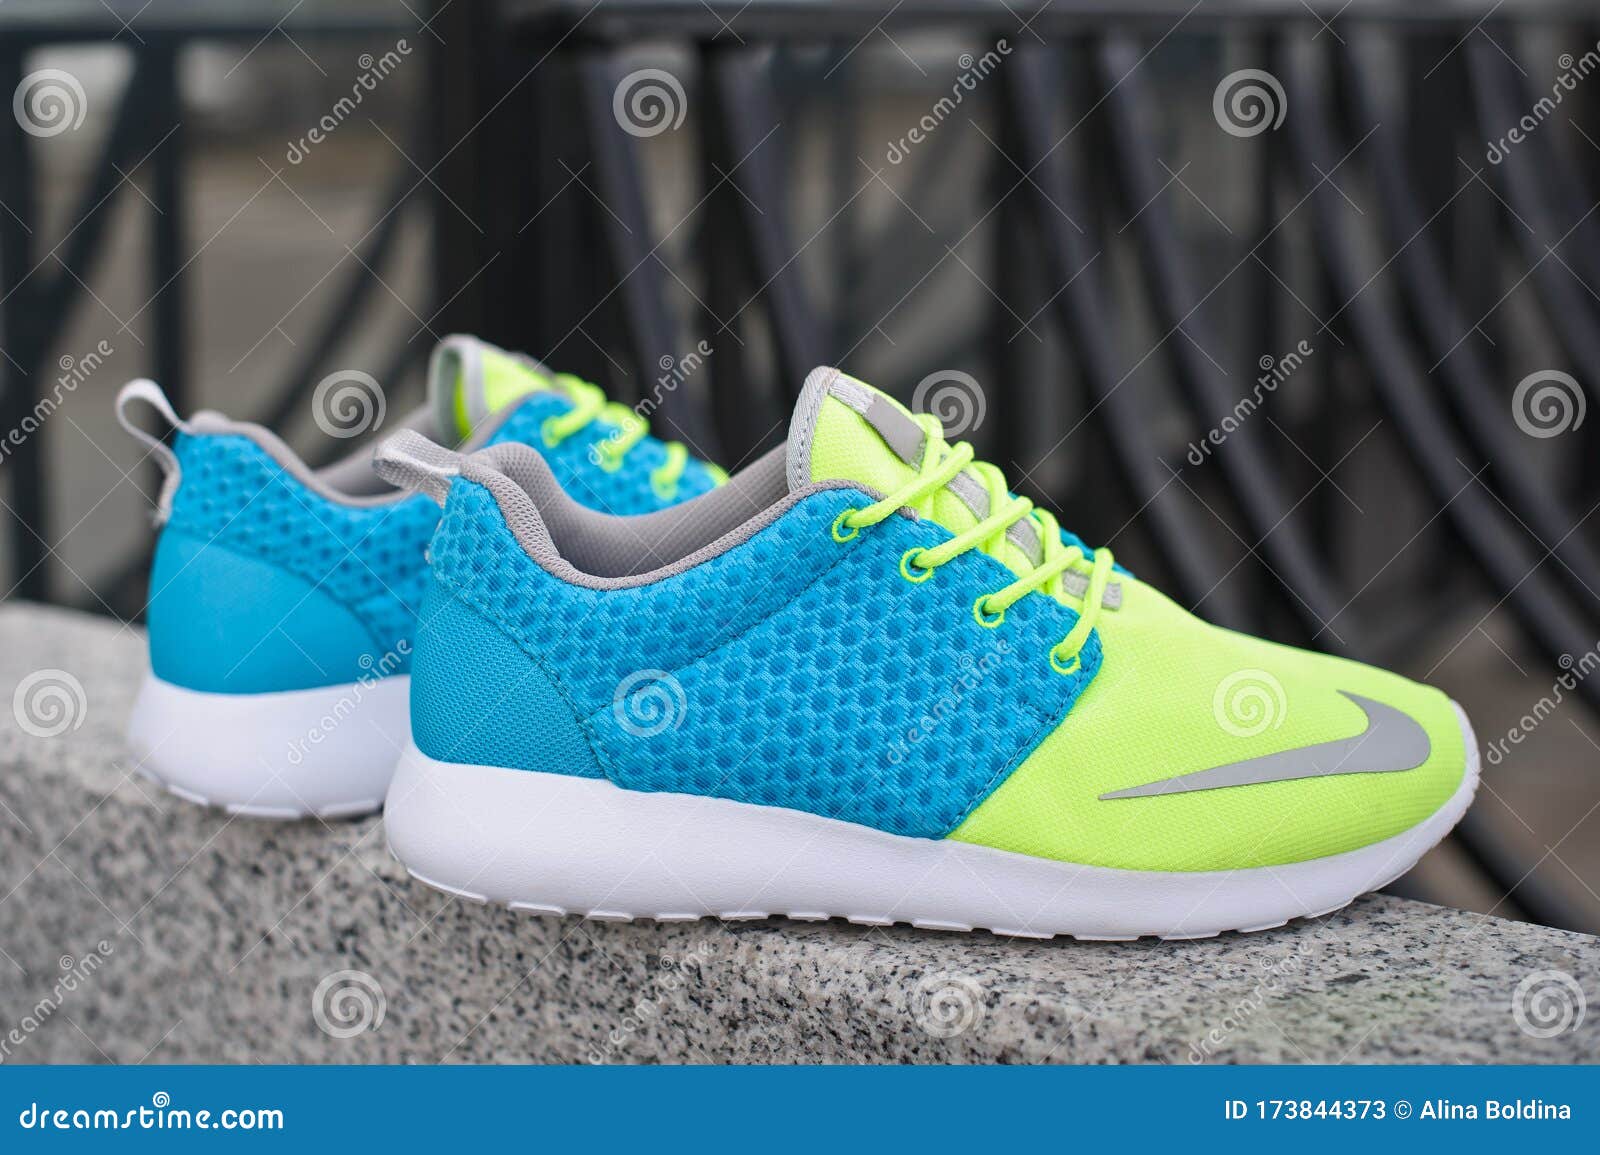 roshe run casual shoes